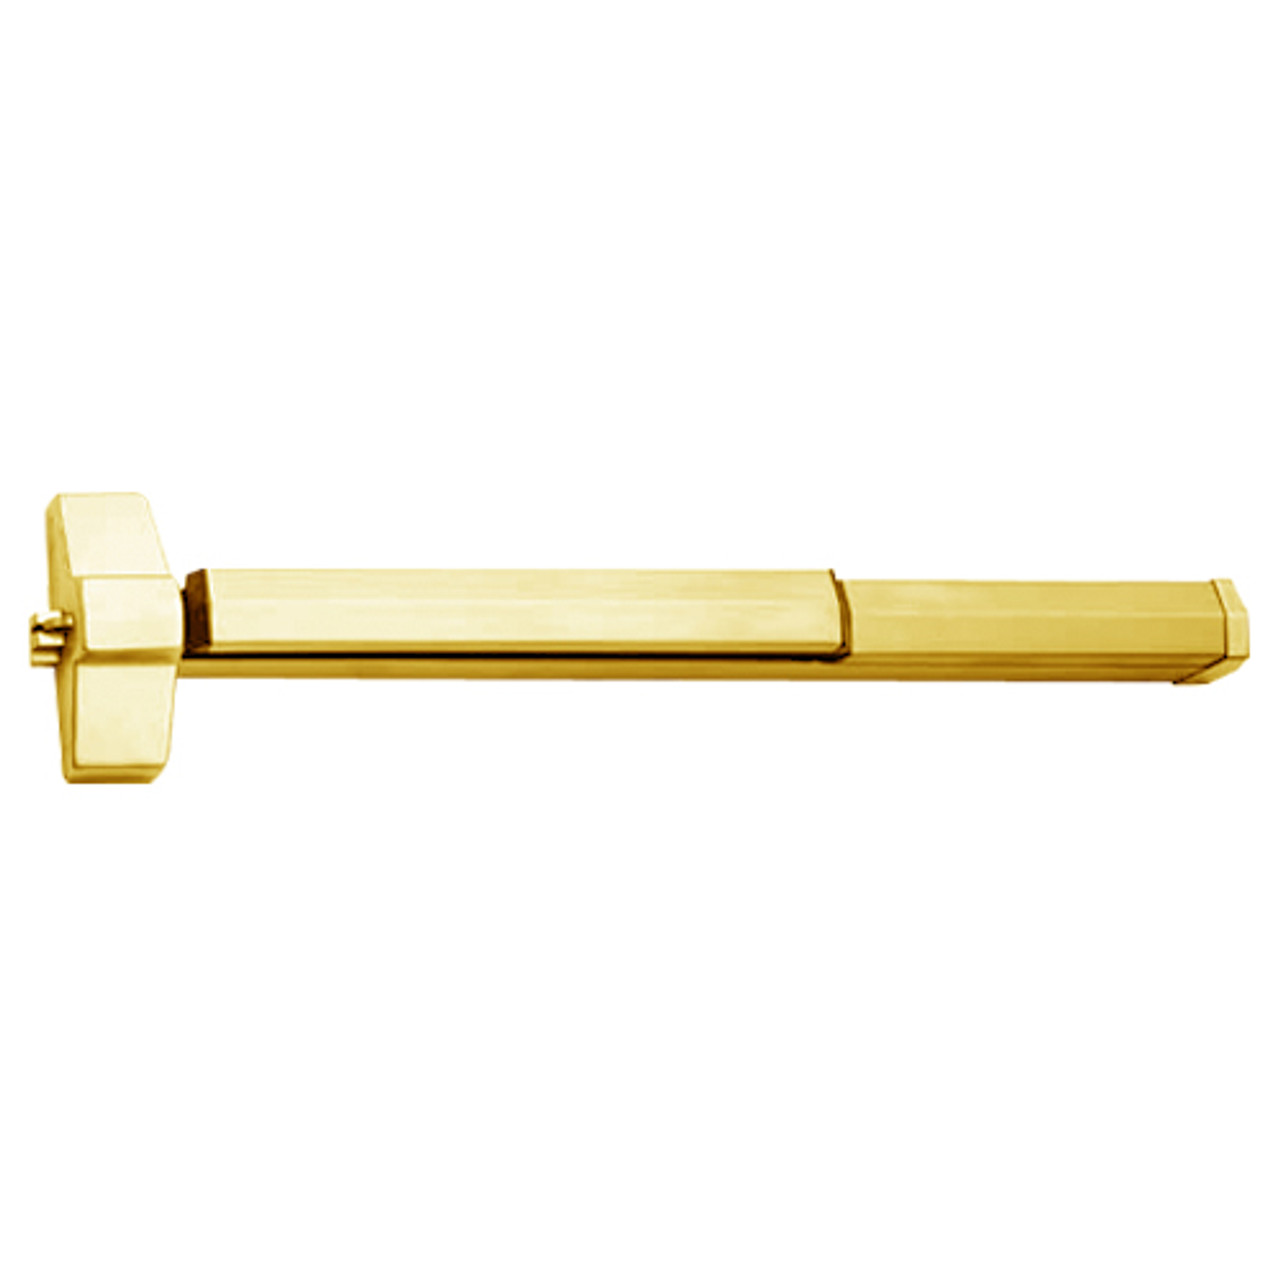 7150F-36-605 Yale 7000 Series Fire Rated SquareBolt Exit Device in Bright Brass